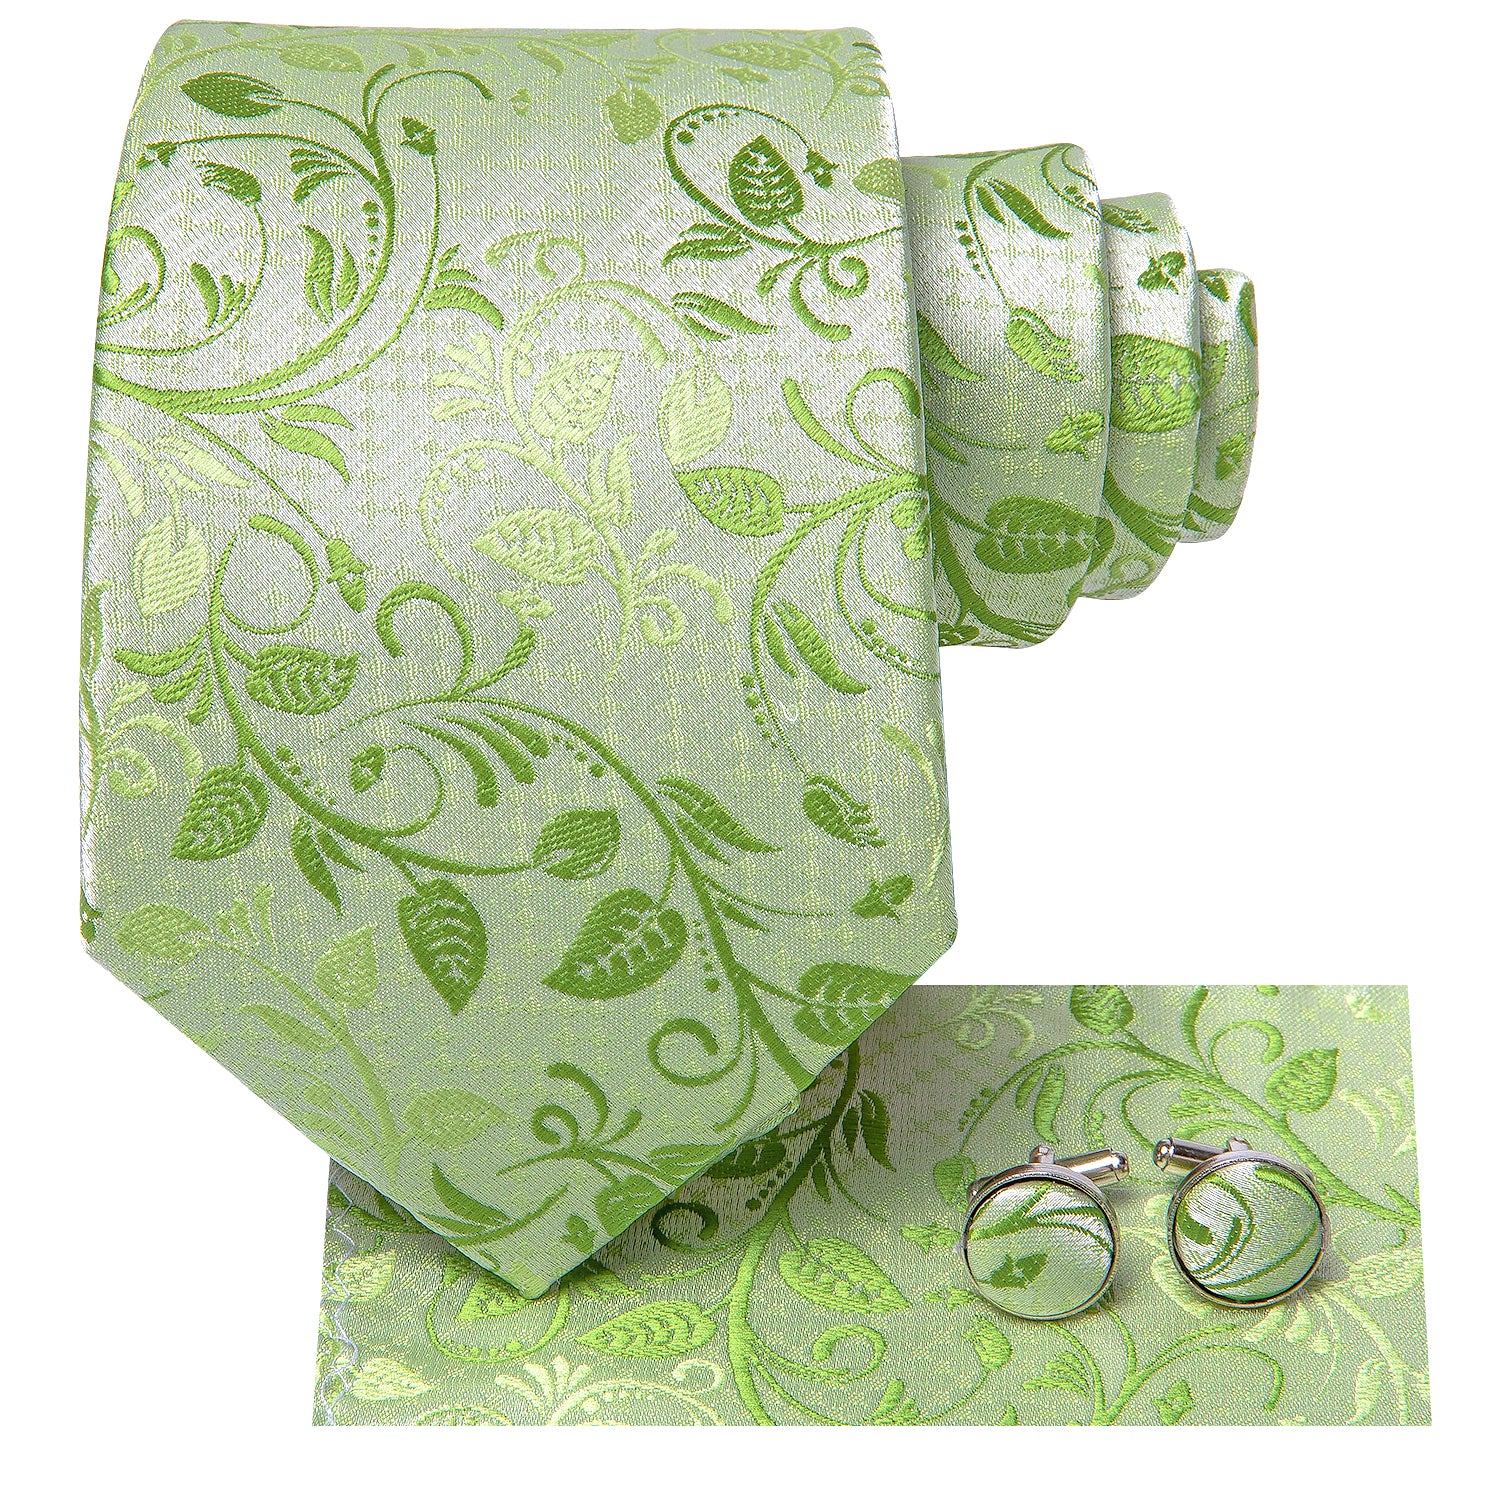 Spring Green Floral 67 Inches Extra Long Tie Handkerchief Cufflinks Set